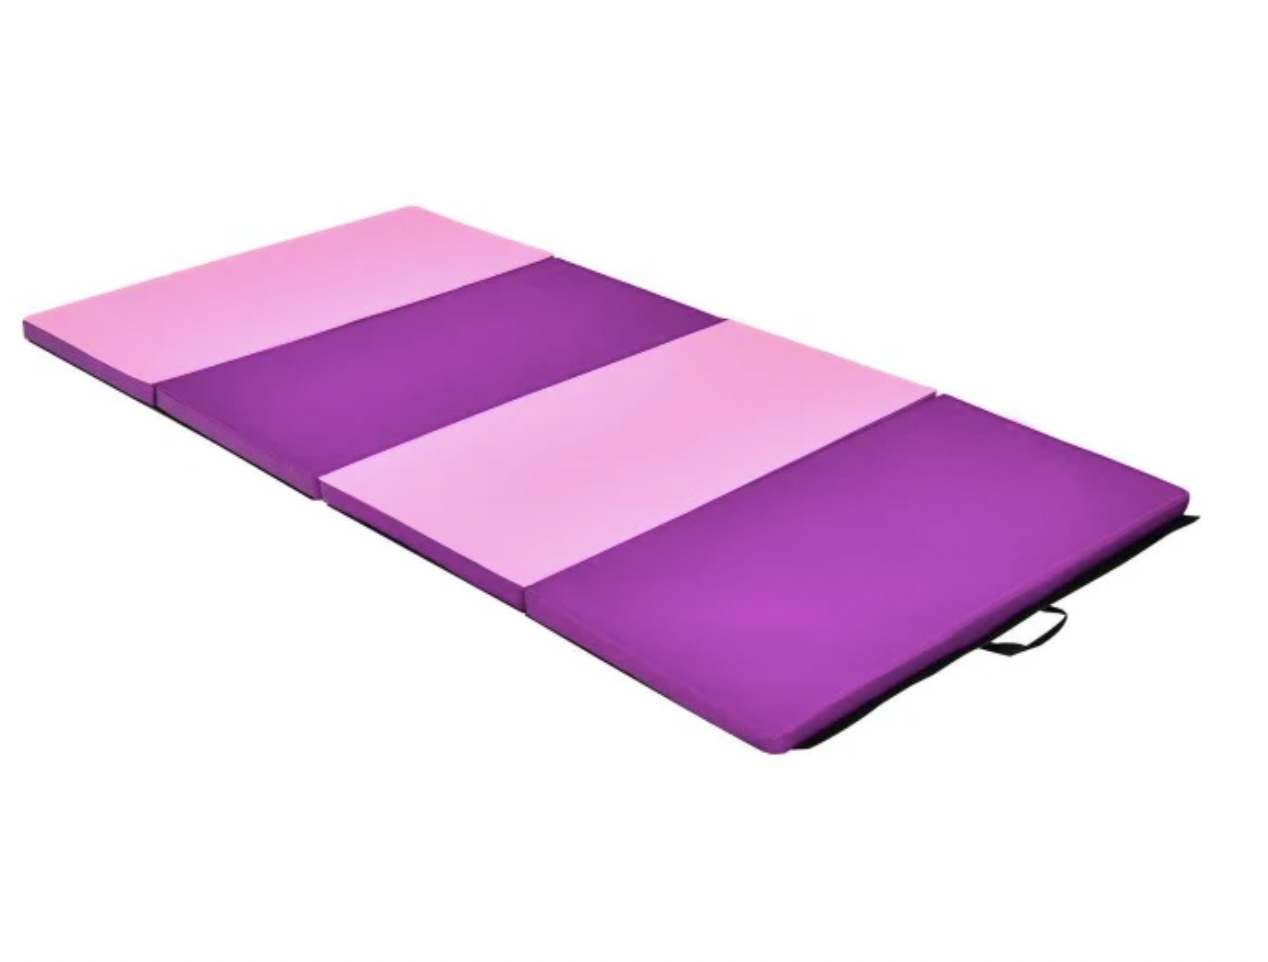 Pink and purple foldable exercise mat. 